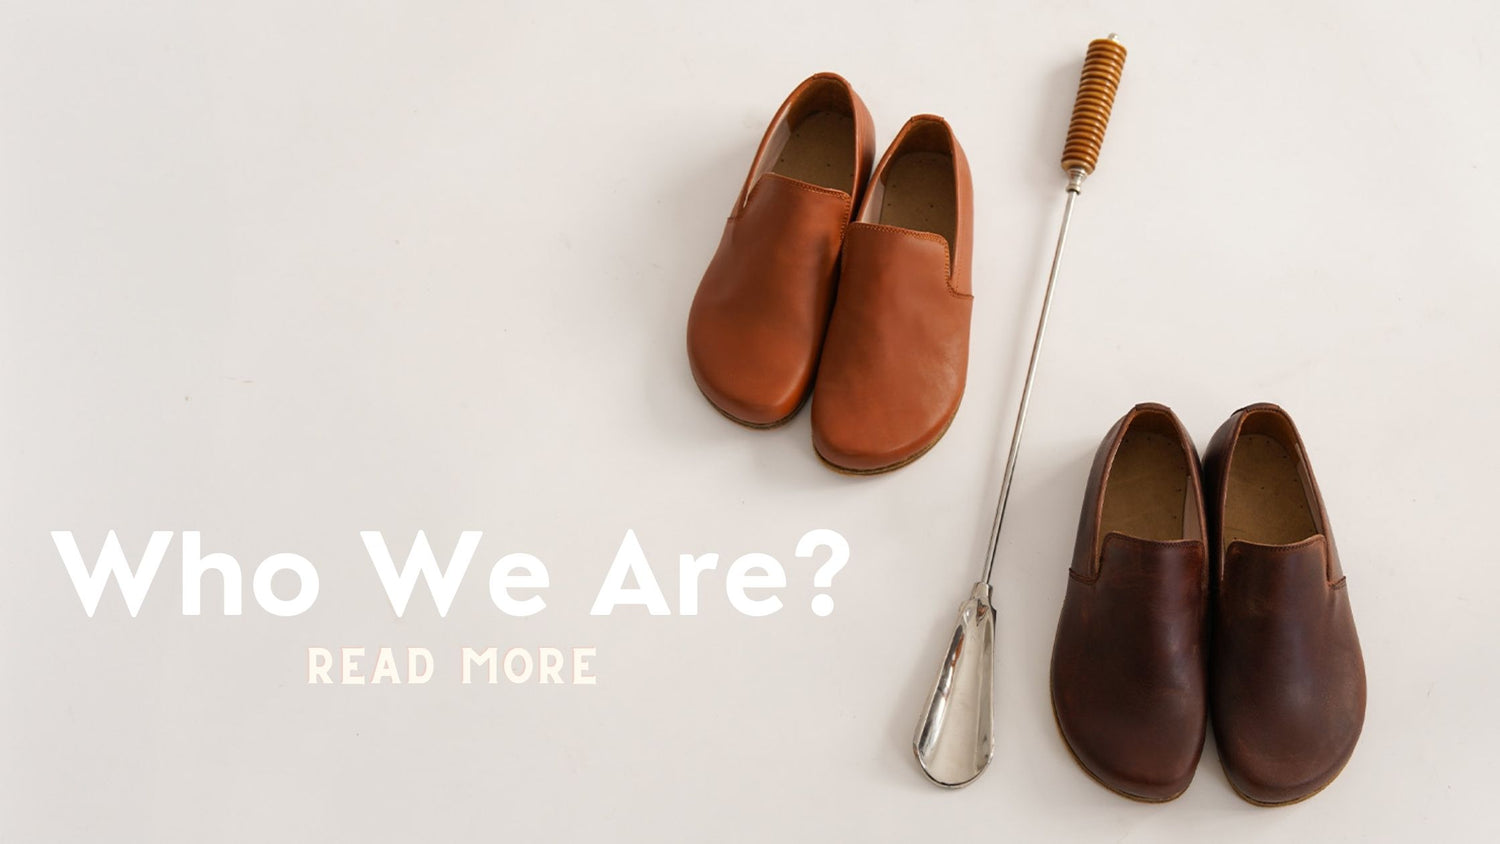 "Who Are We?" on a white background Two brown leather slip-on shoes next to a retro shoe horn that says: 'Read More' text that invites brand discovery.